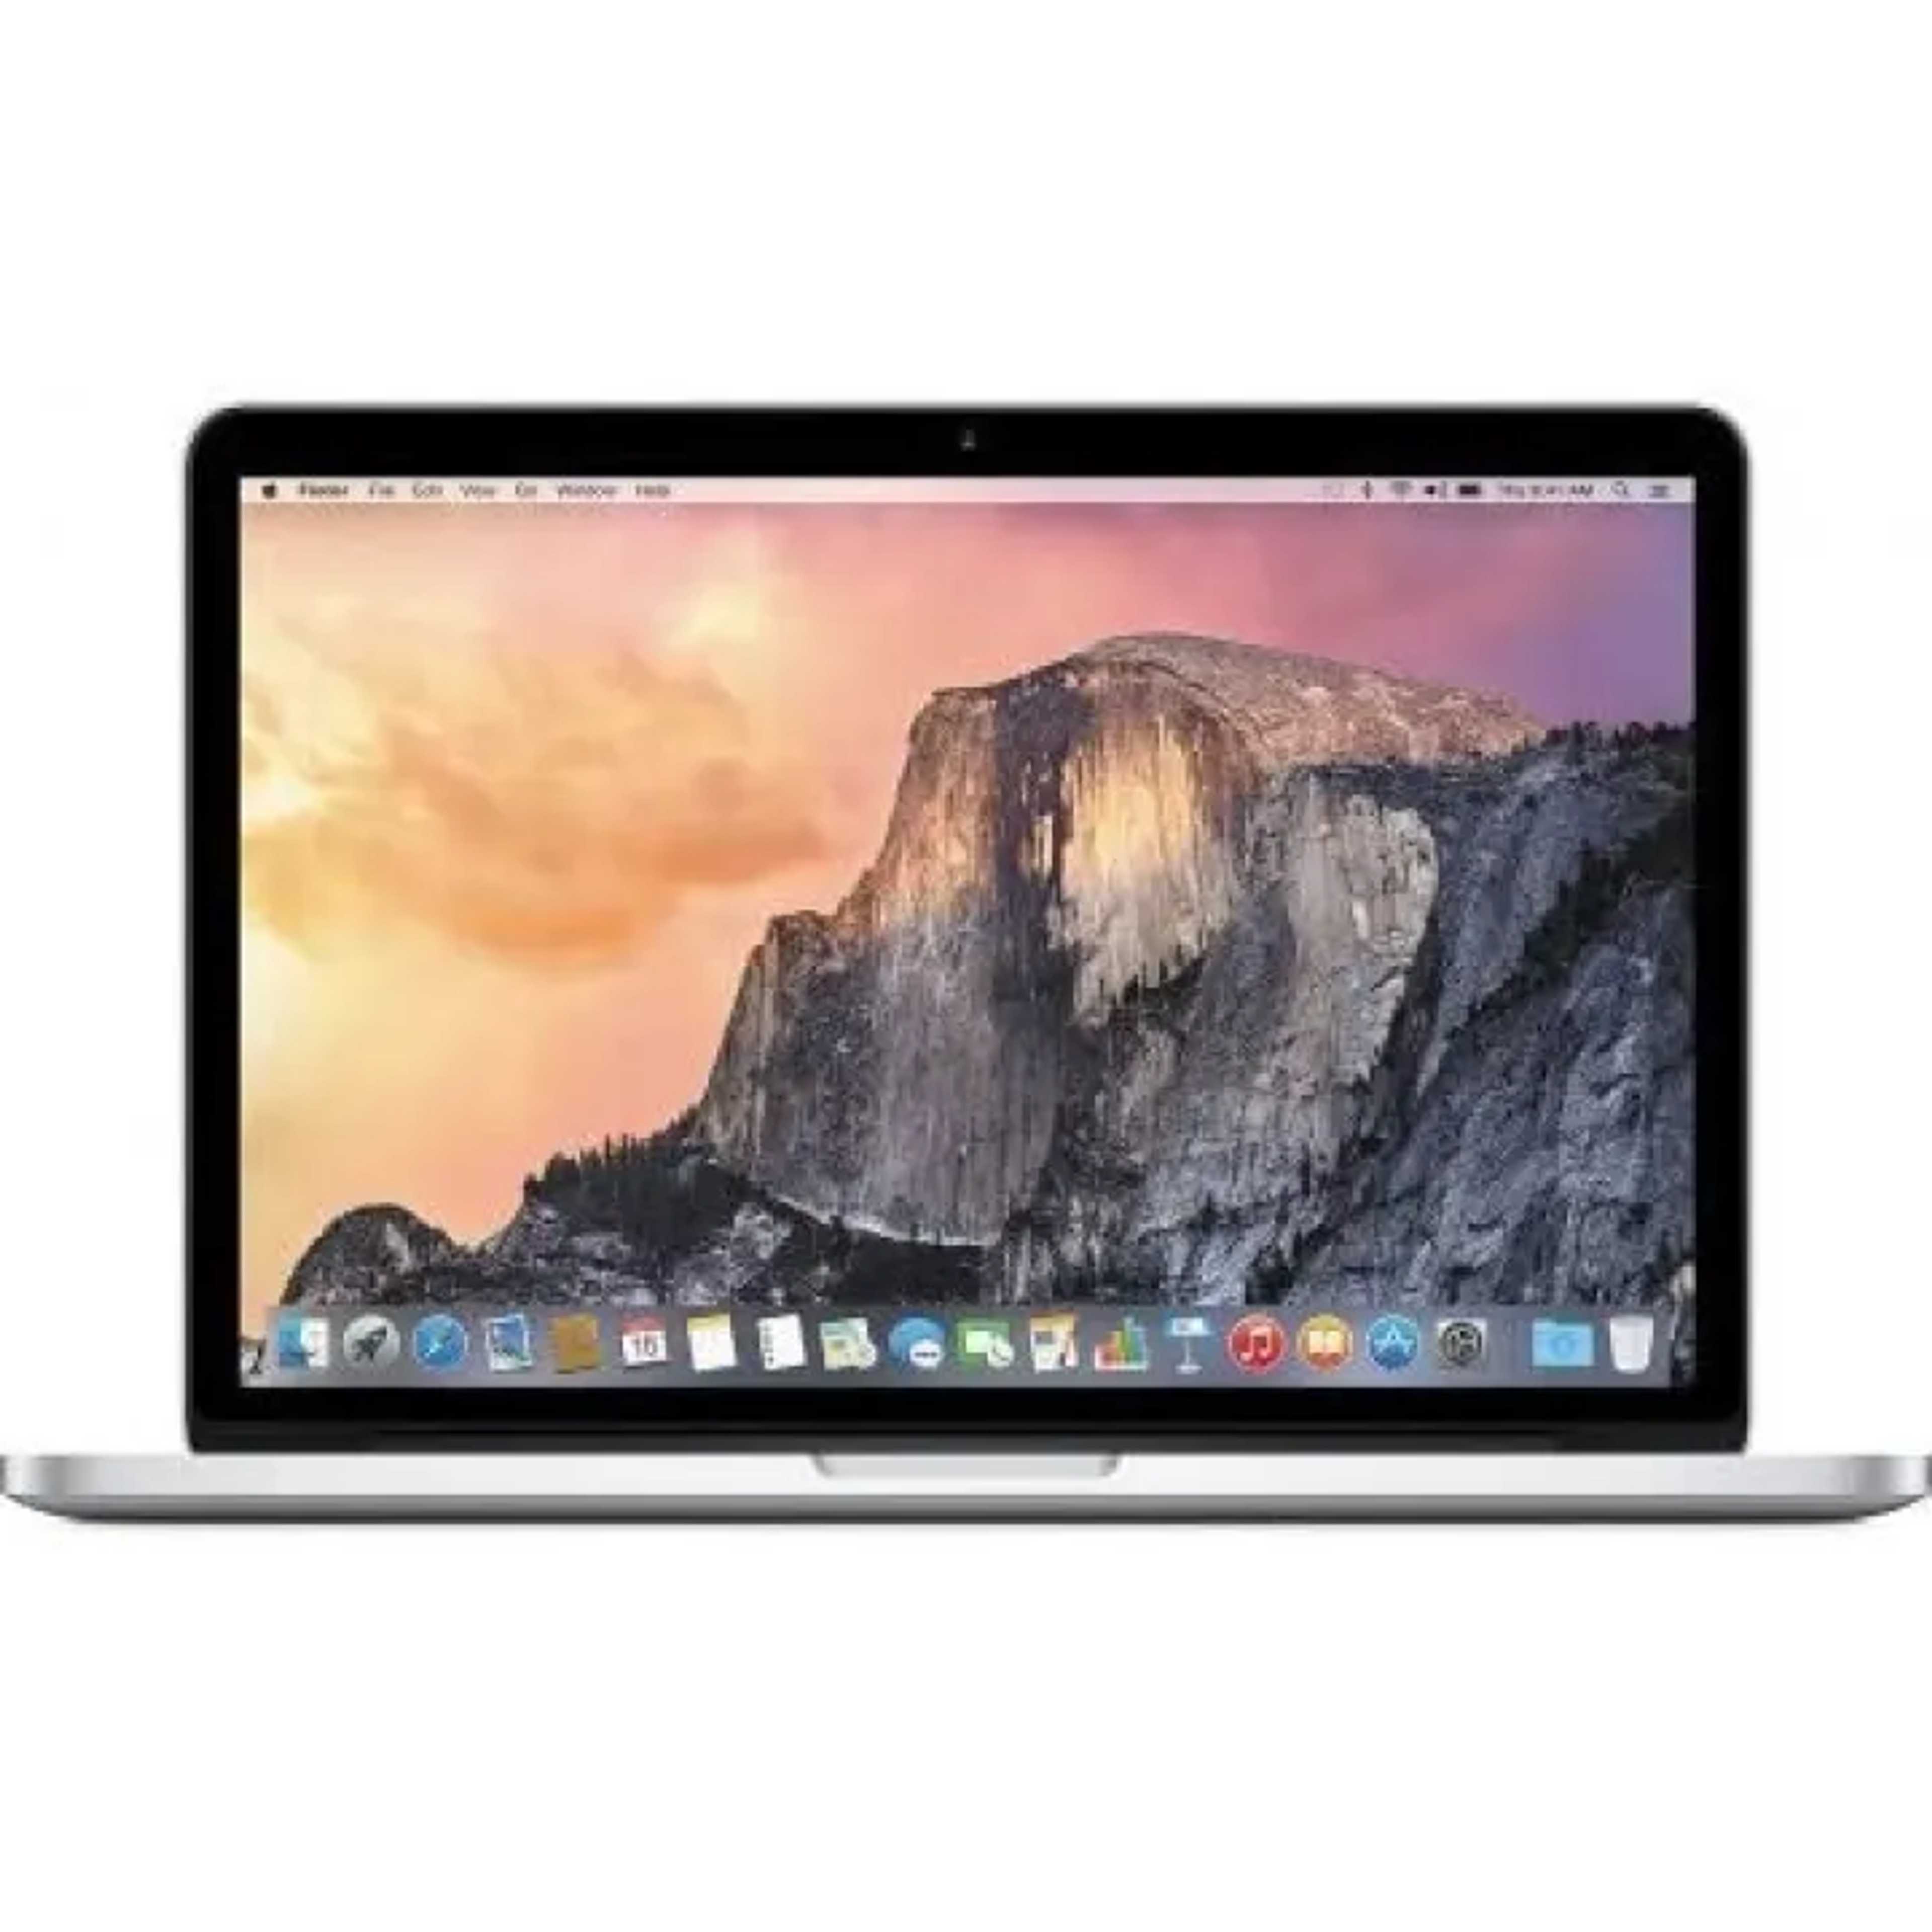 Apple MacBook Pro 2012 - 128GB Storage 4GB RAM - 2.5GHz Dual-Core Core i5 - Mid 2012 13.3-inch LED Display - Dual Operating System MacOS & Windows 10 - Silver